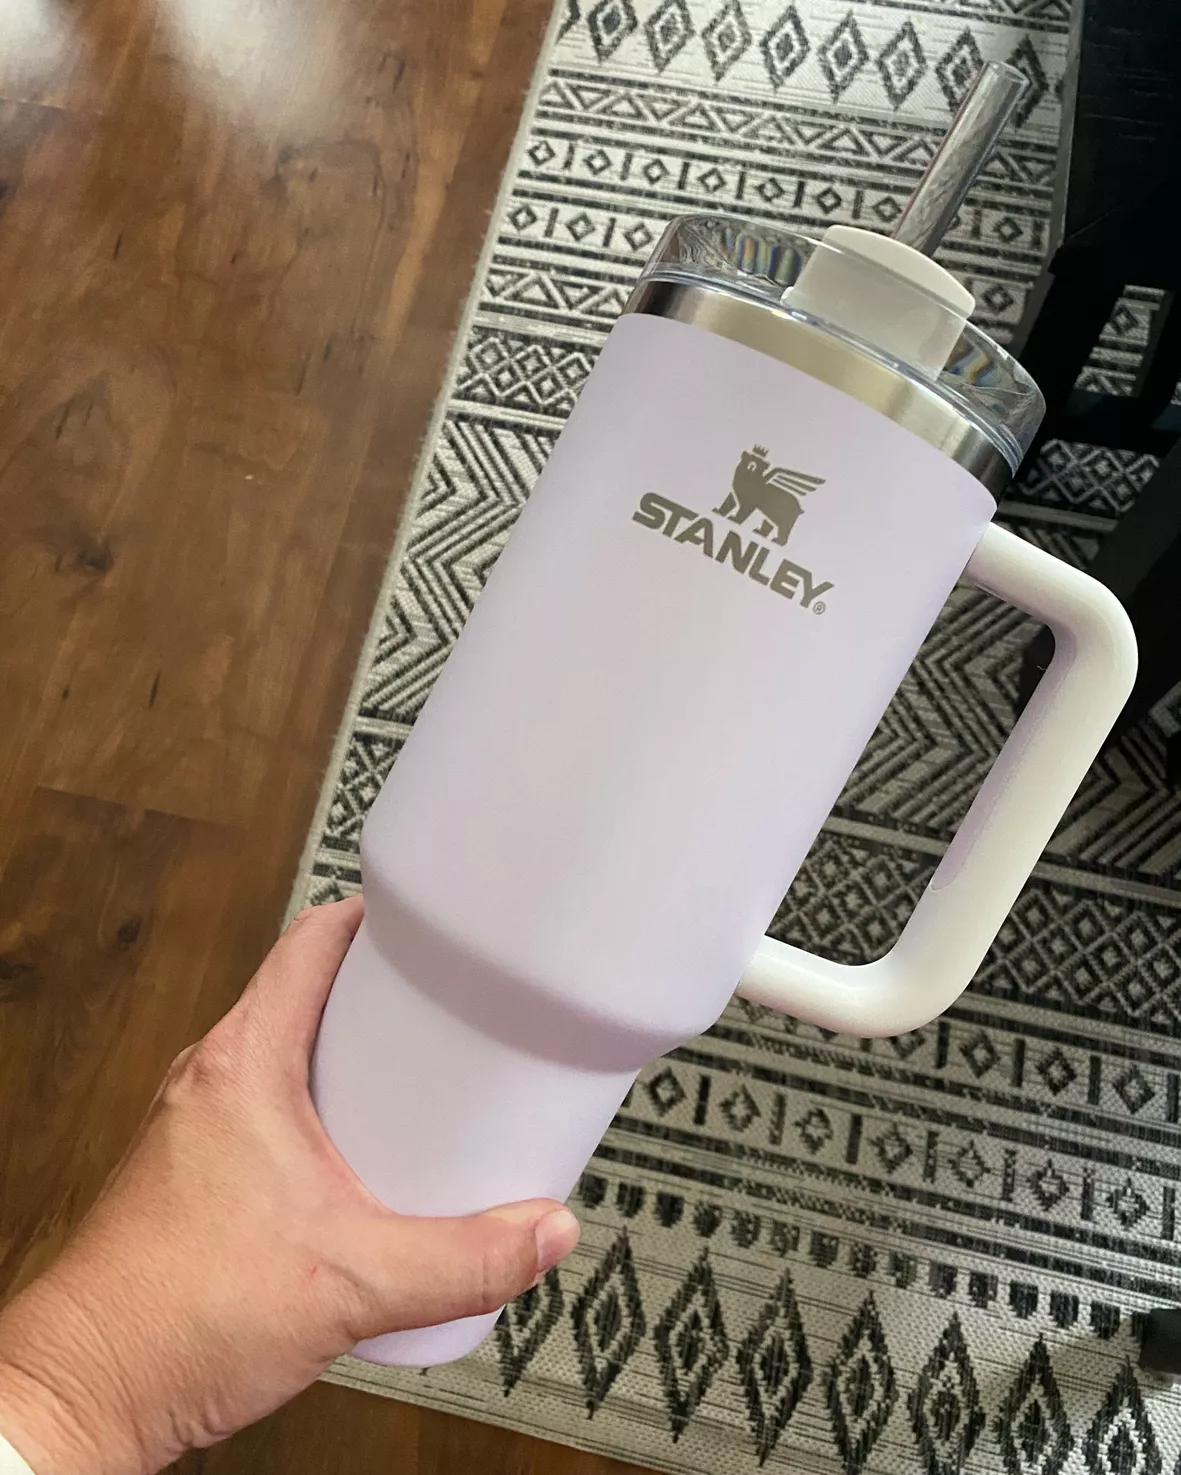 Looking for a limited edition Stanley tumbler? All 5 are still in